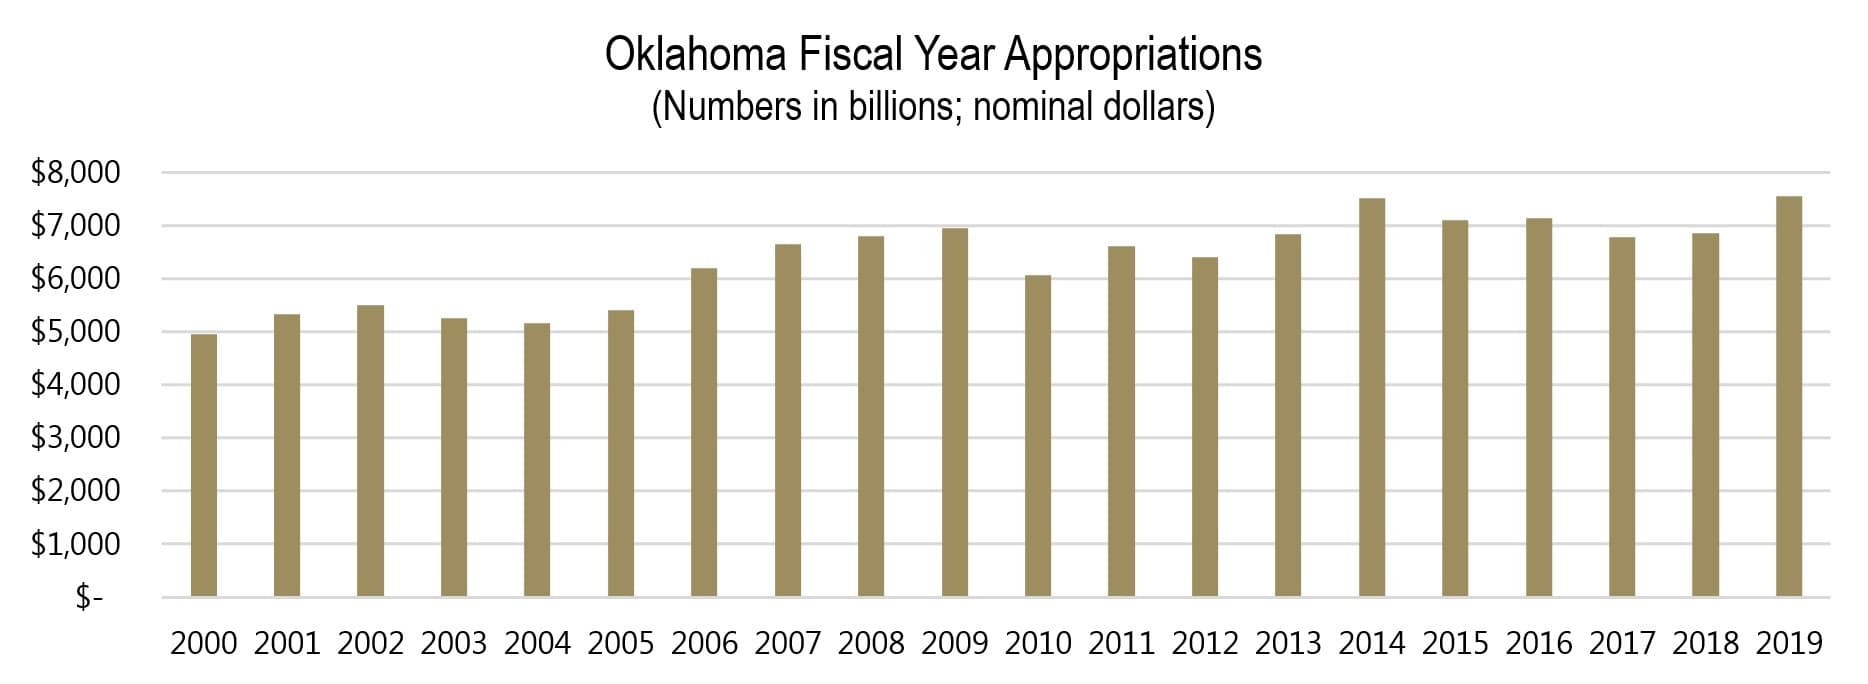 Oklahoma Fiscal Year Appropriations